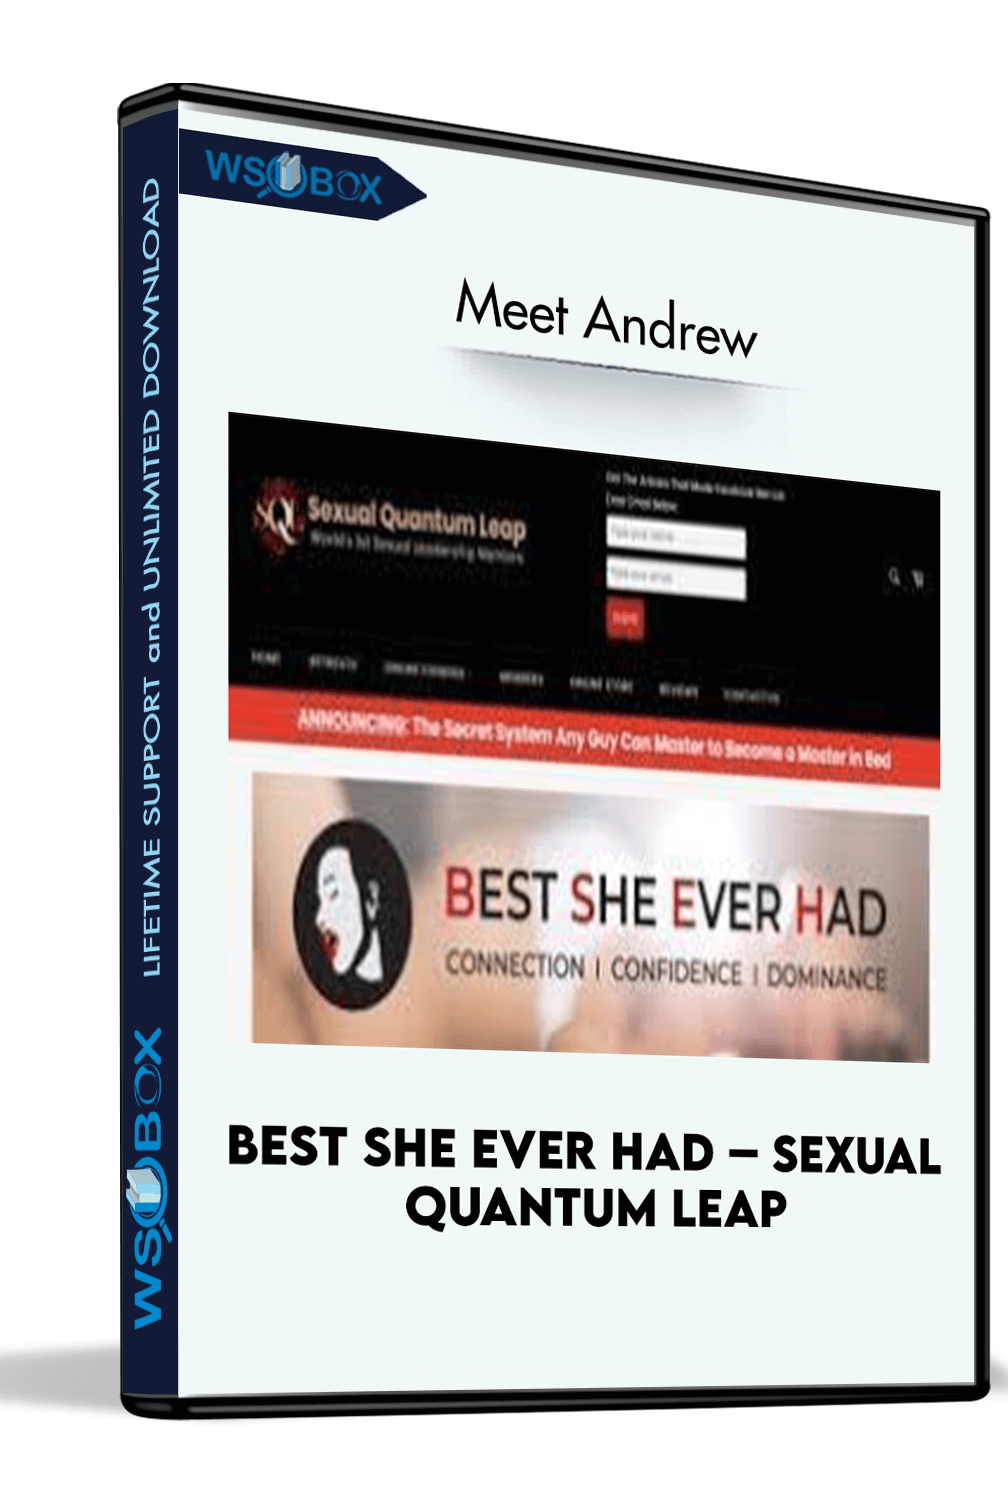 best-she-ever-had-sexual-quantum-leap-meet-andrew